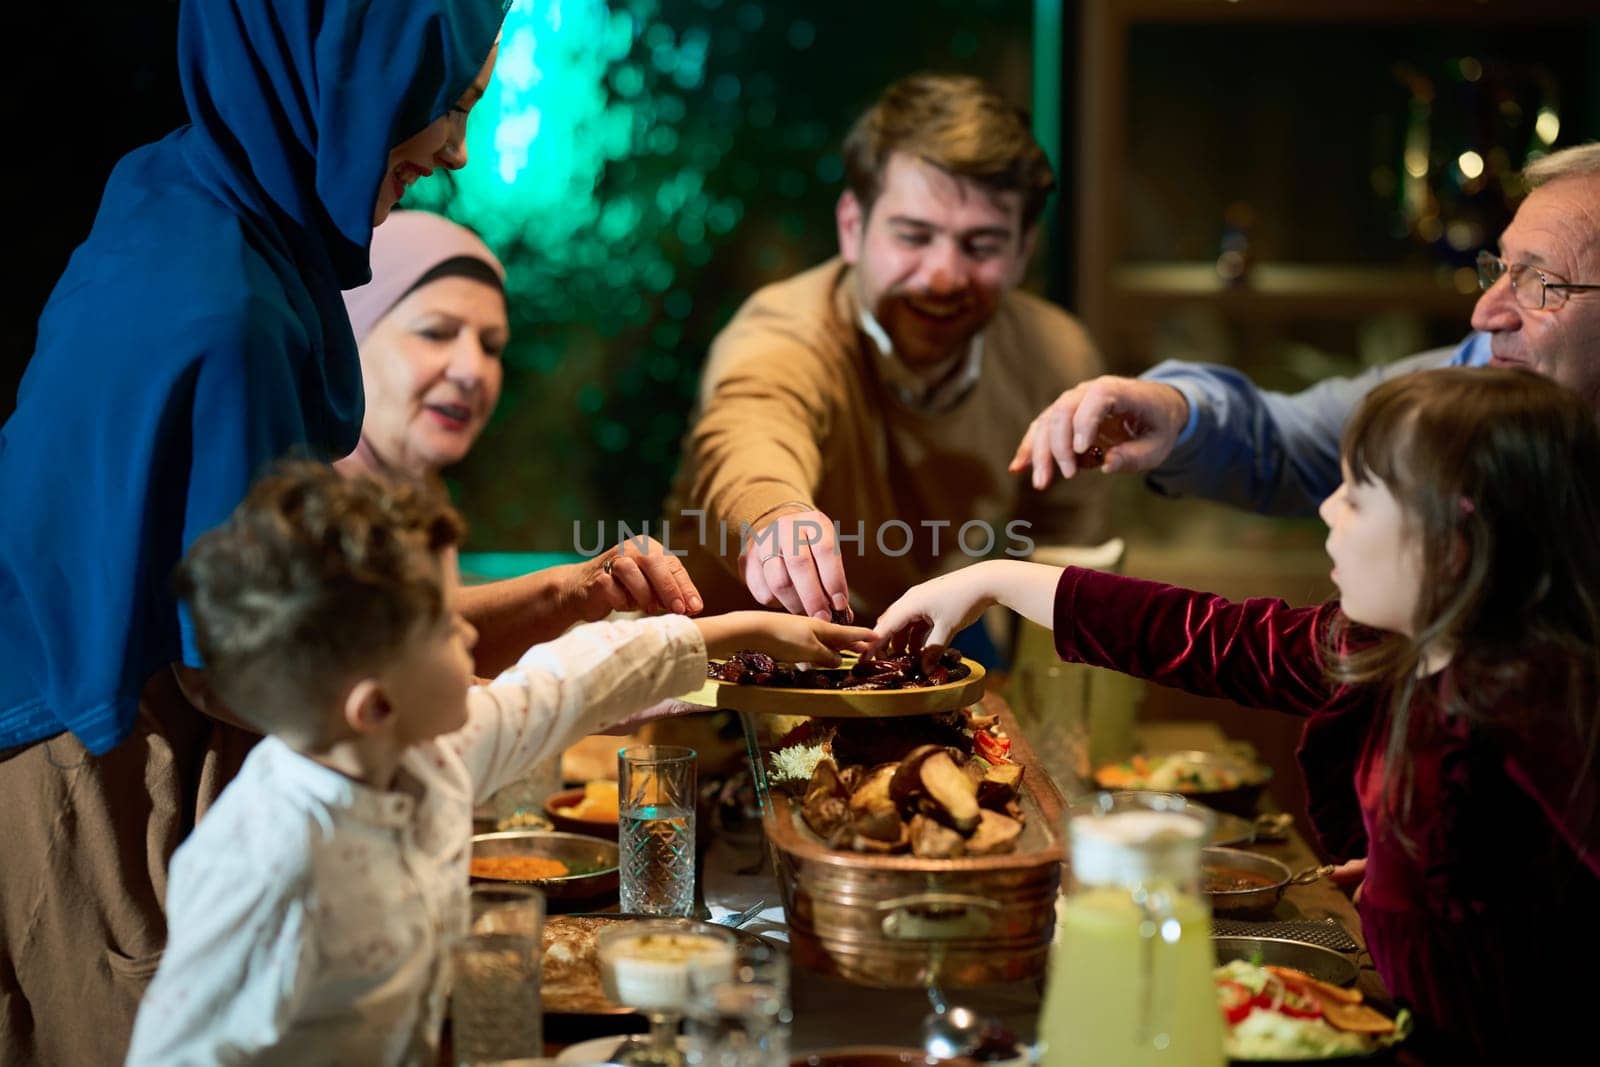 In this modern portrayal, a European Islamic family partakes in the tradition of breaking their Ramadan fast with dates, symbolizing unity, cultural heritage, and spiritual observance during the holy month of Ramadan.